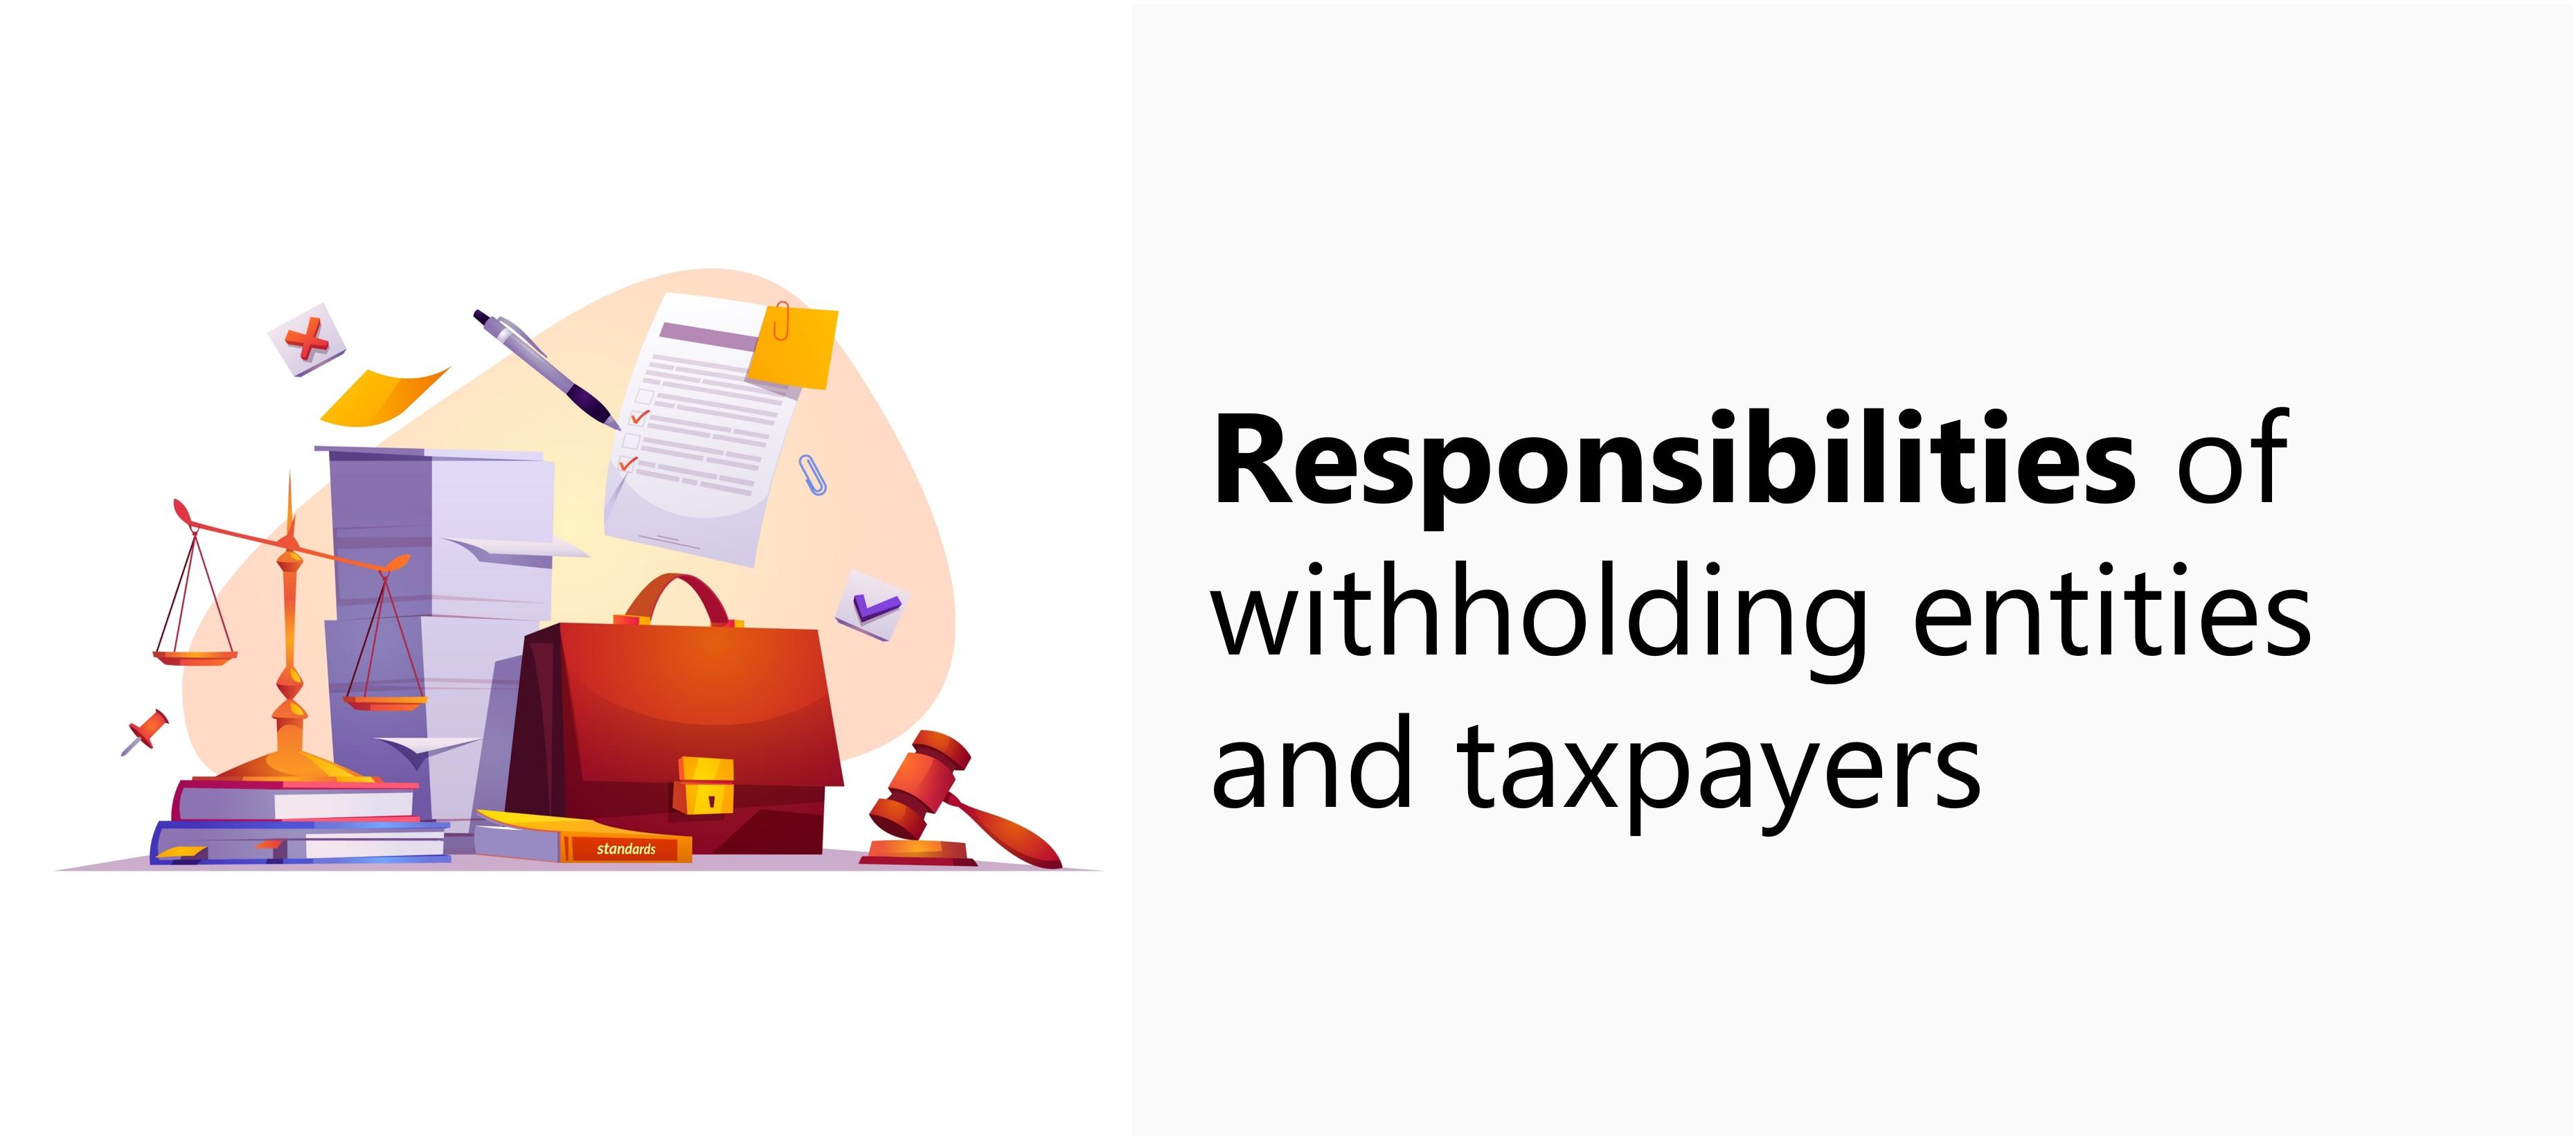 responsibilities-of-withholding-entity-and-taxpayer-in-withholding-tax